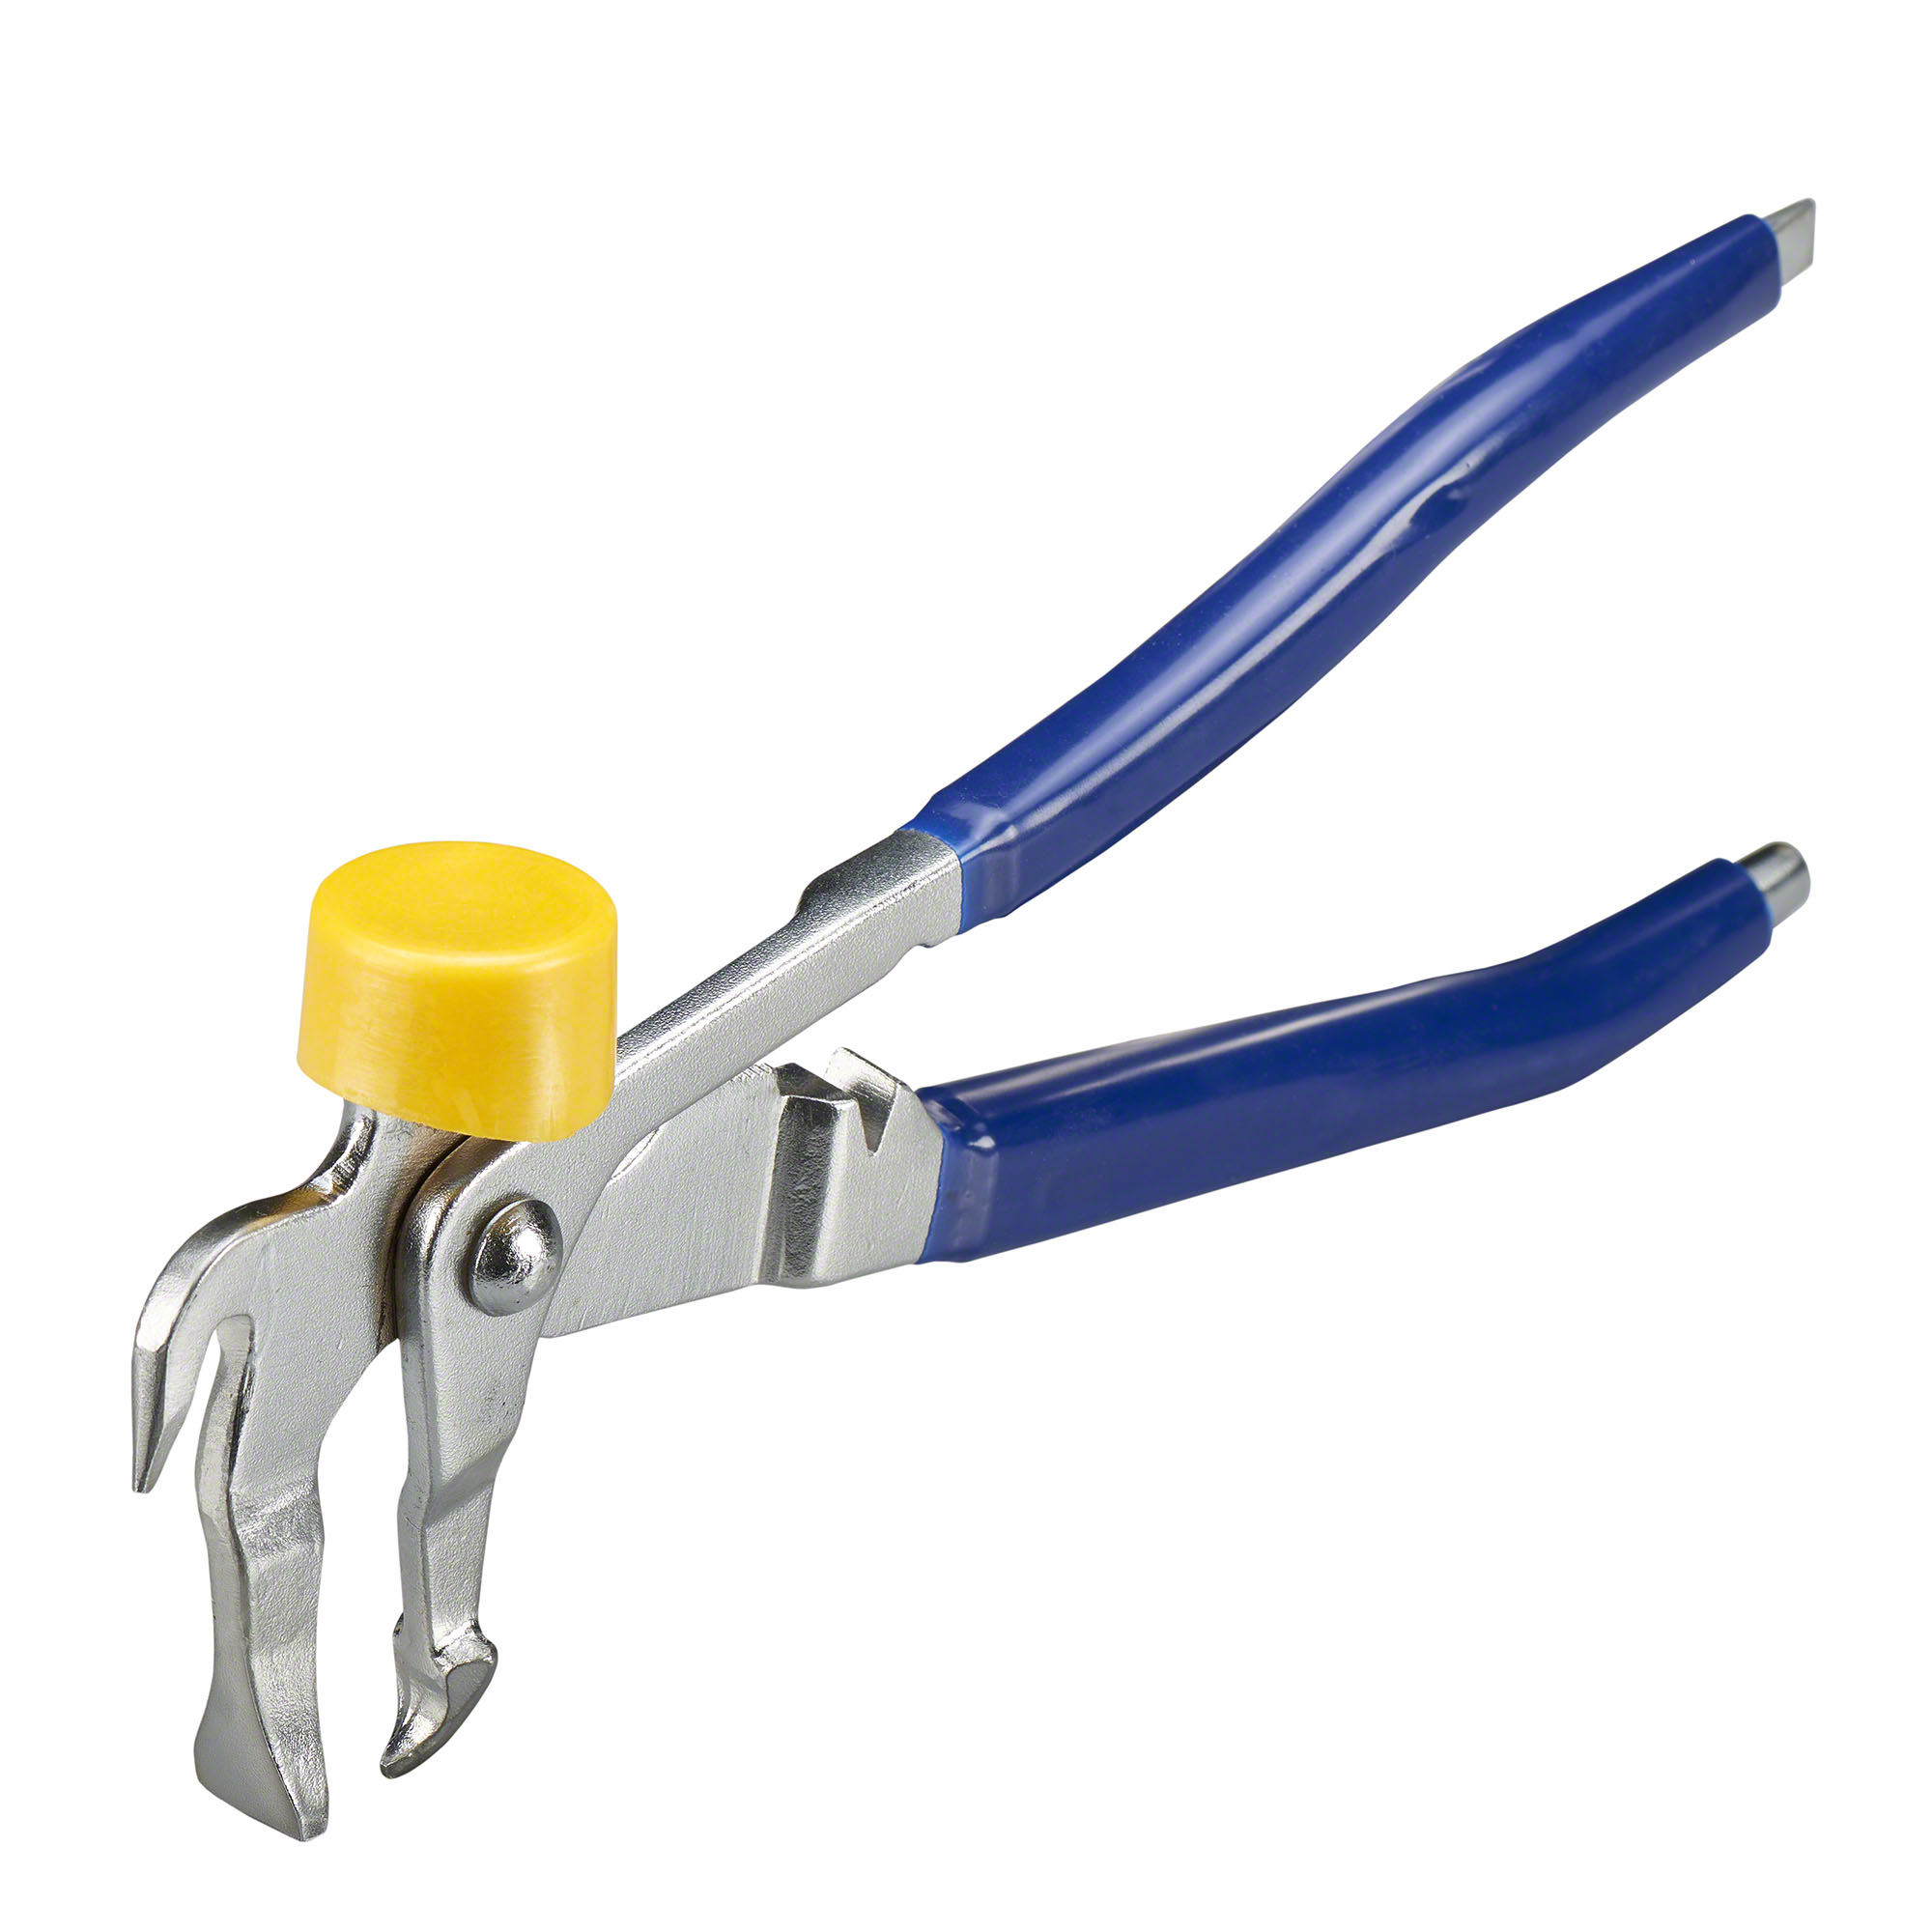 Impact weight removal pliers - Schlaggewichte